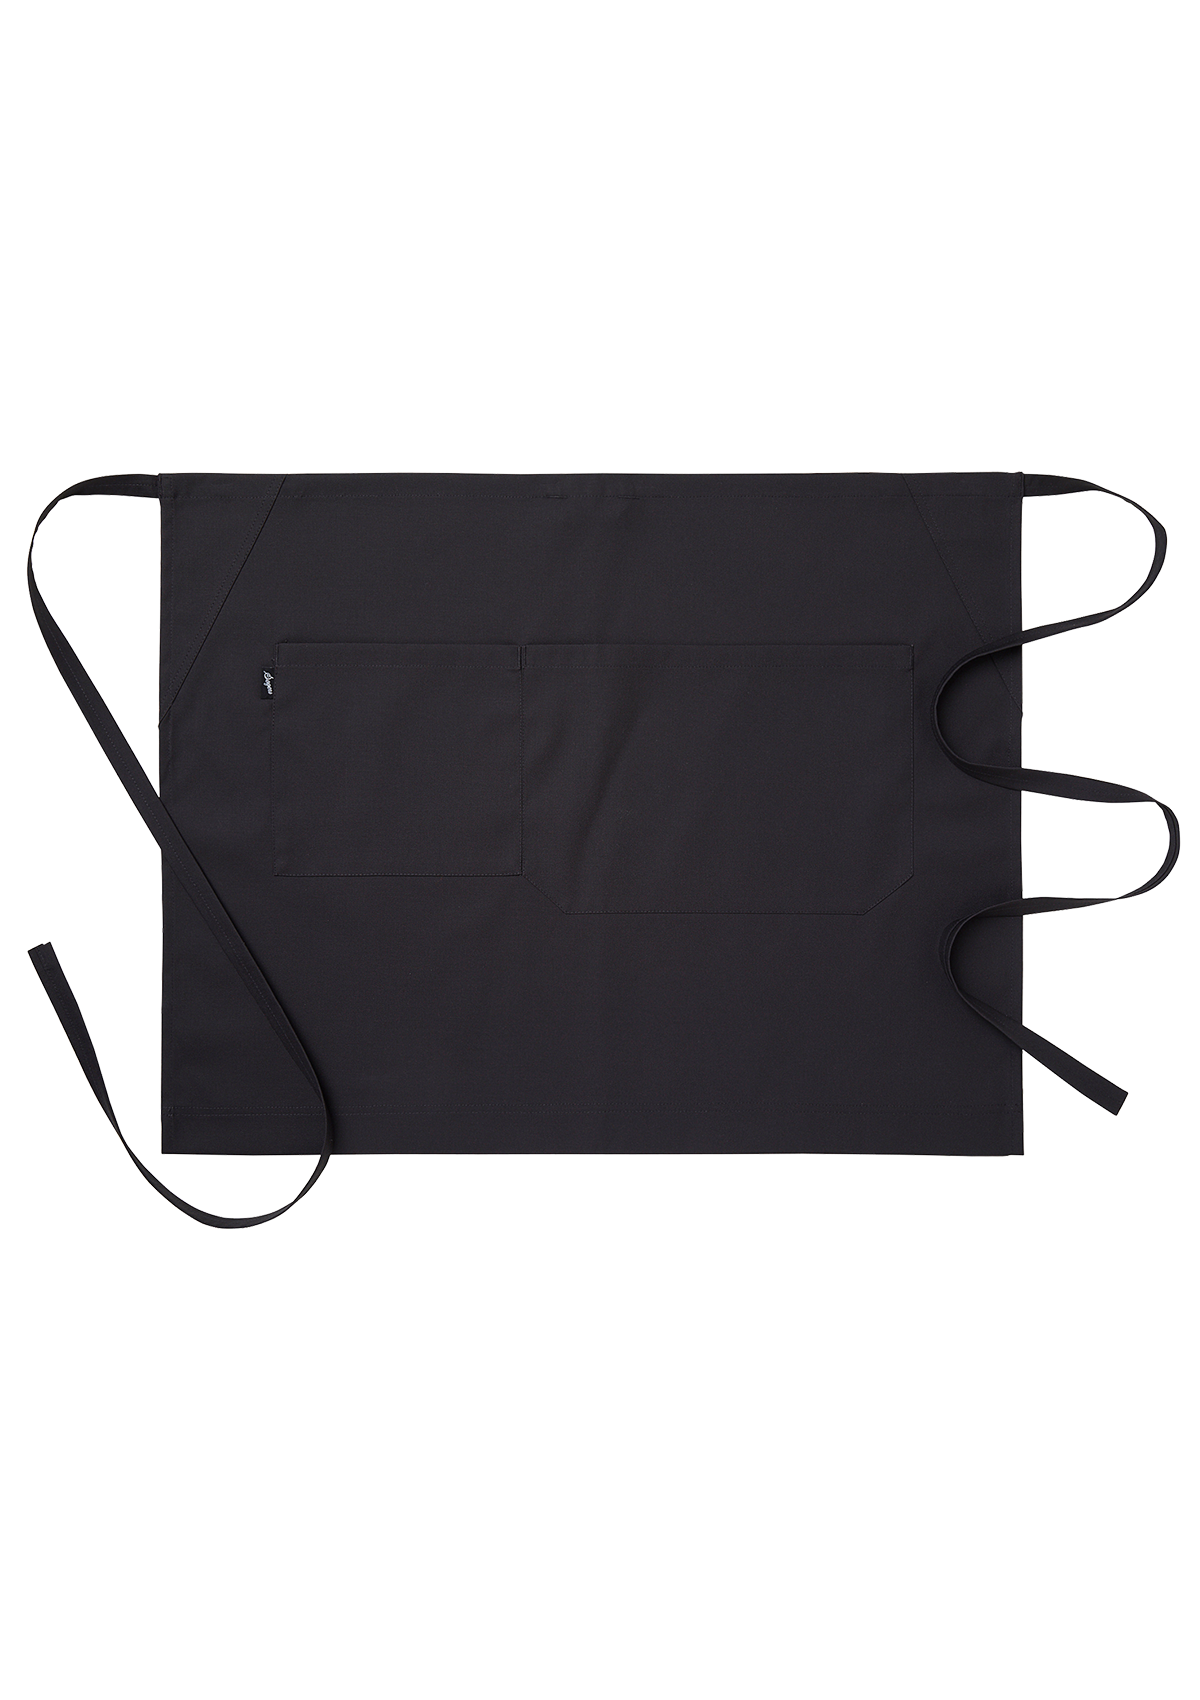 Unisex waist apron with side and inside pockets. Segers | Cookniche